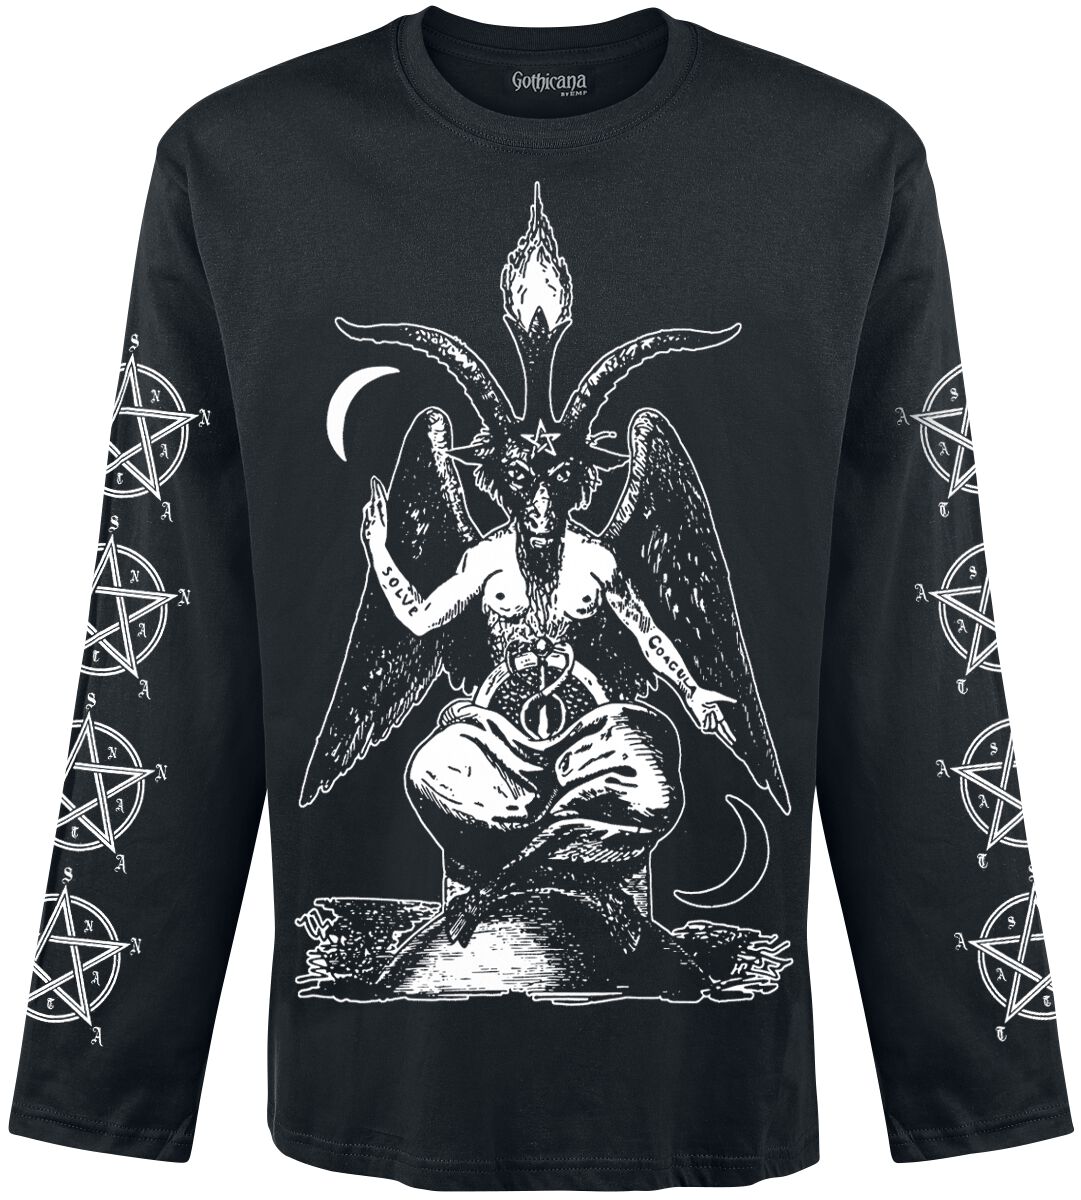 Image of Maglia Maniche Lunghe Gothic di Gothicana by EMP - Long-Sleeve Shirt with Gothic Print - L a XXL - Uomo - nero